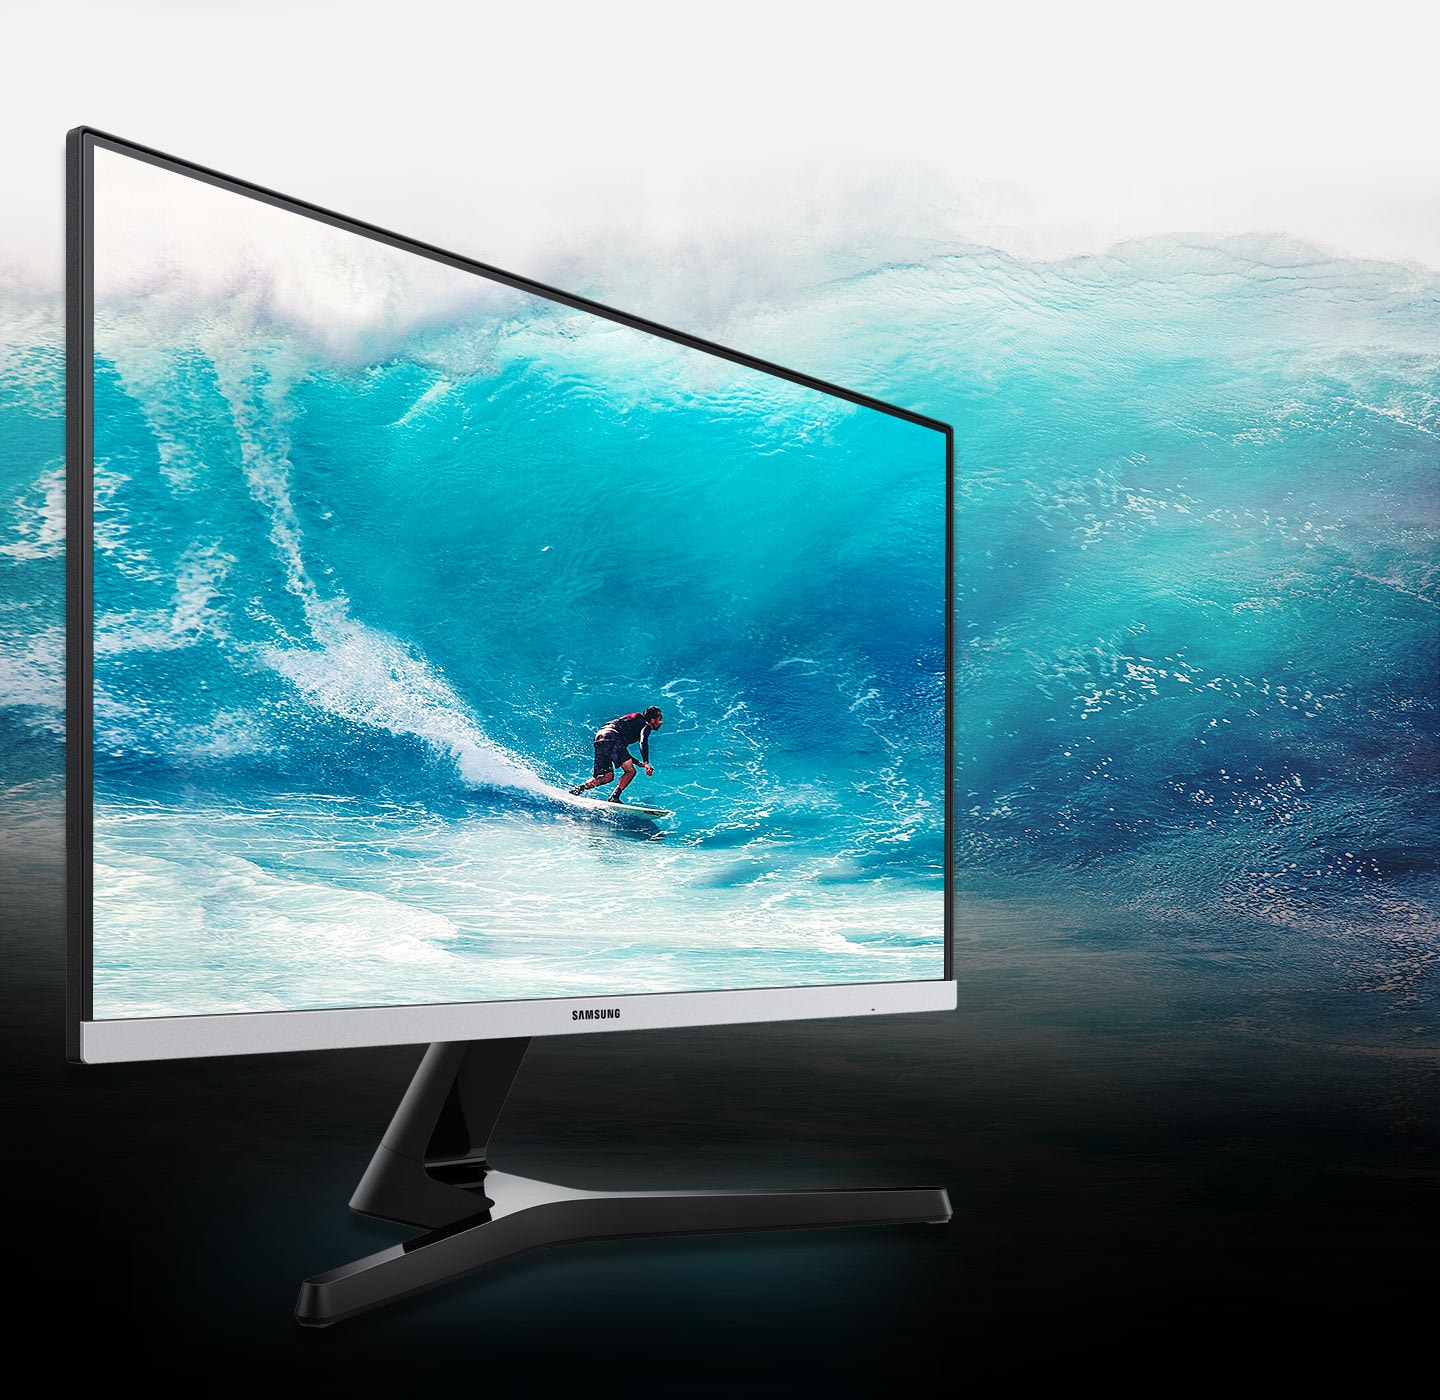 An SR35 monitor is placed on it and a man is riding a surfboard in the screen.